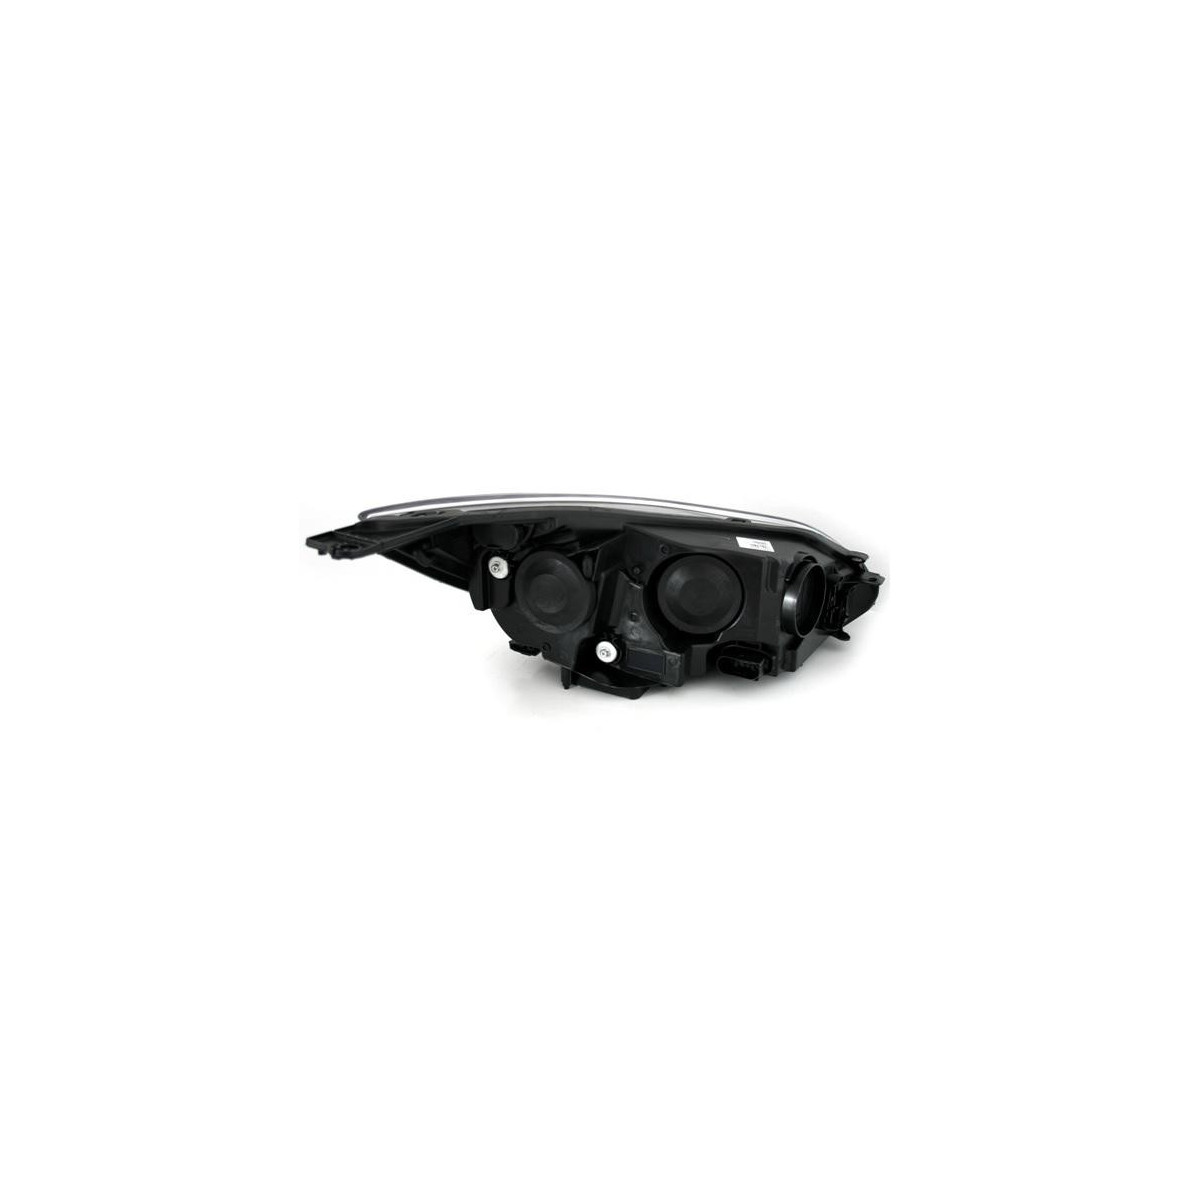 LAMPY P. FORD FOCUS MK3 11- WING CHROM